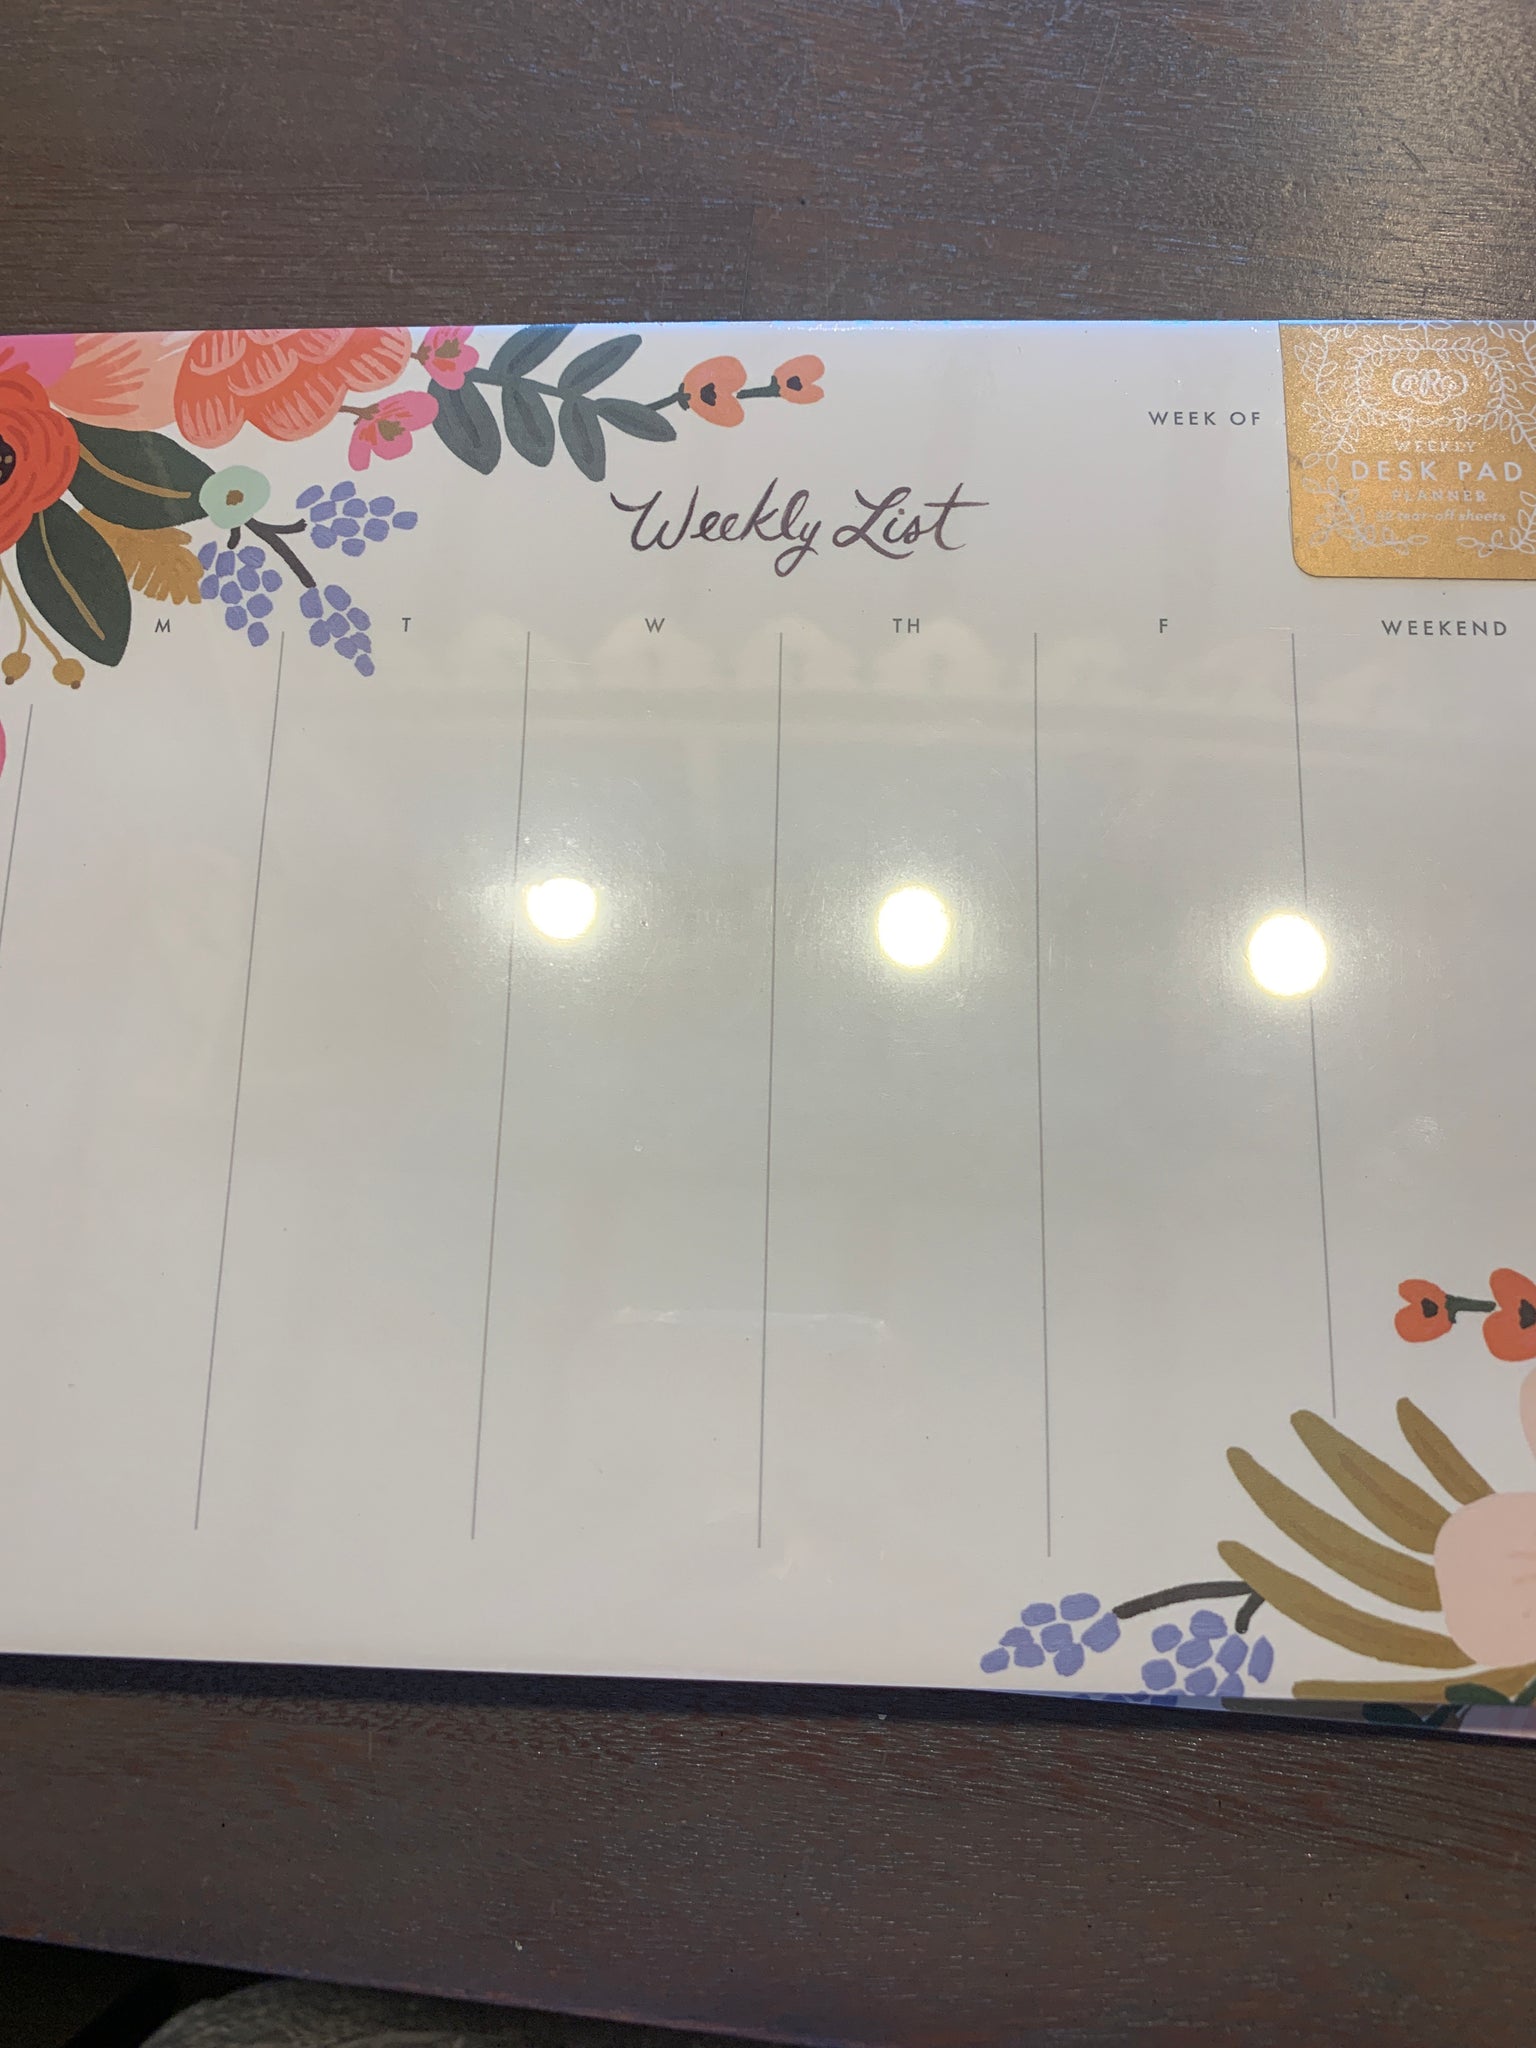 Lively Floral weekly list